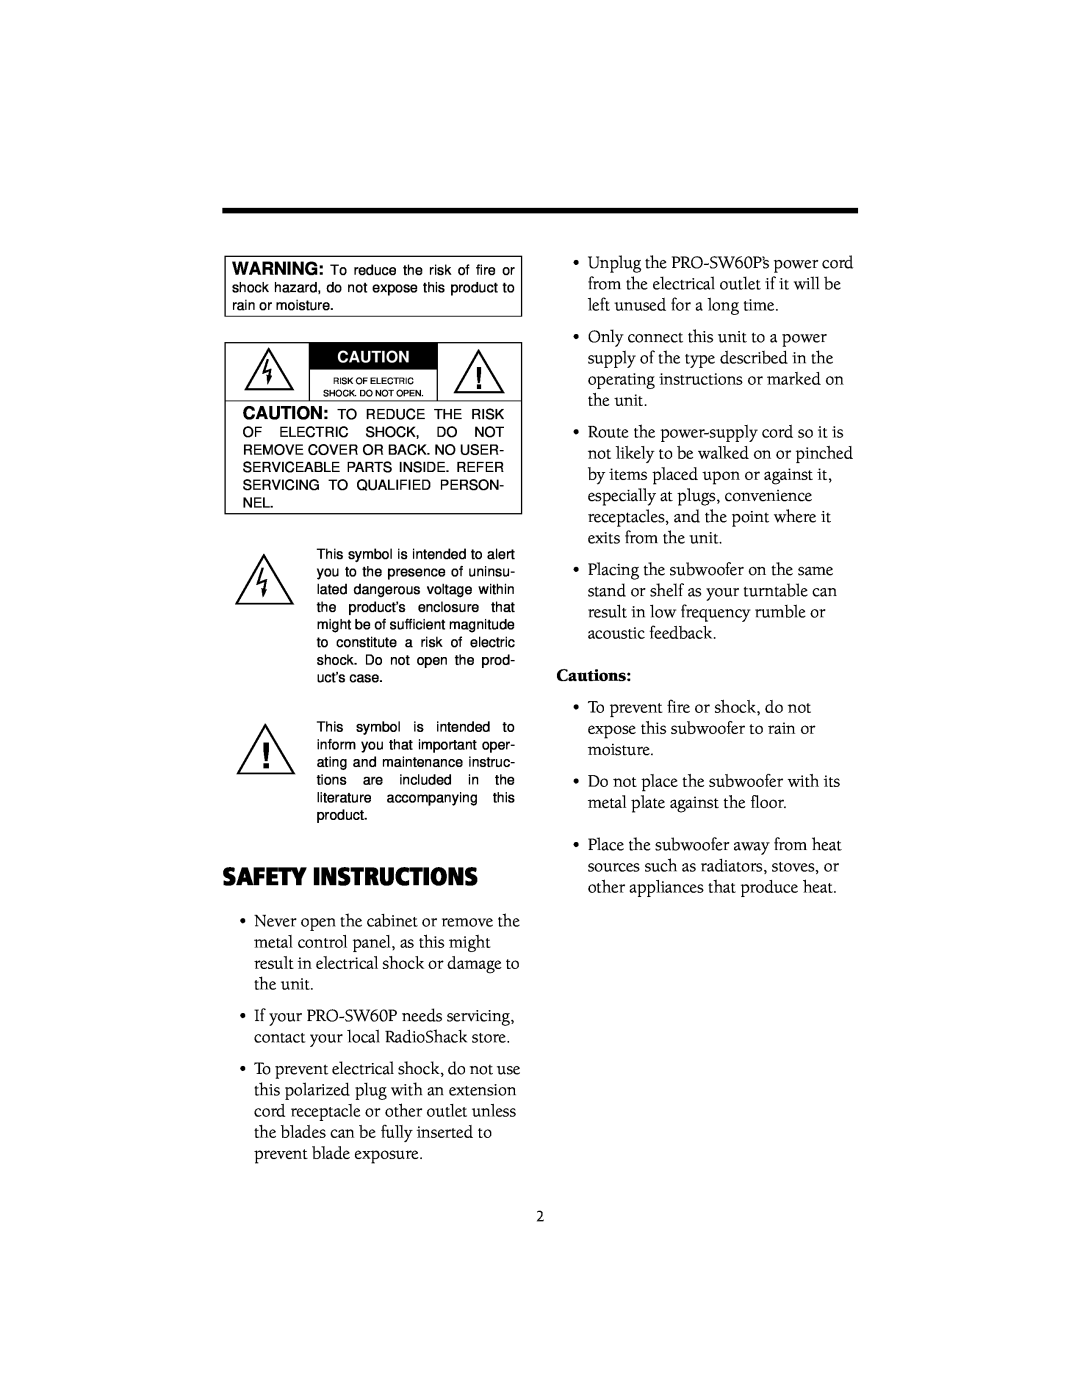 RCA 40-5023 manual Safety Instructions, Cautions 